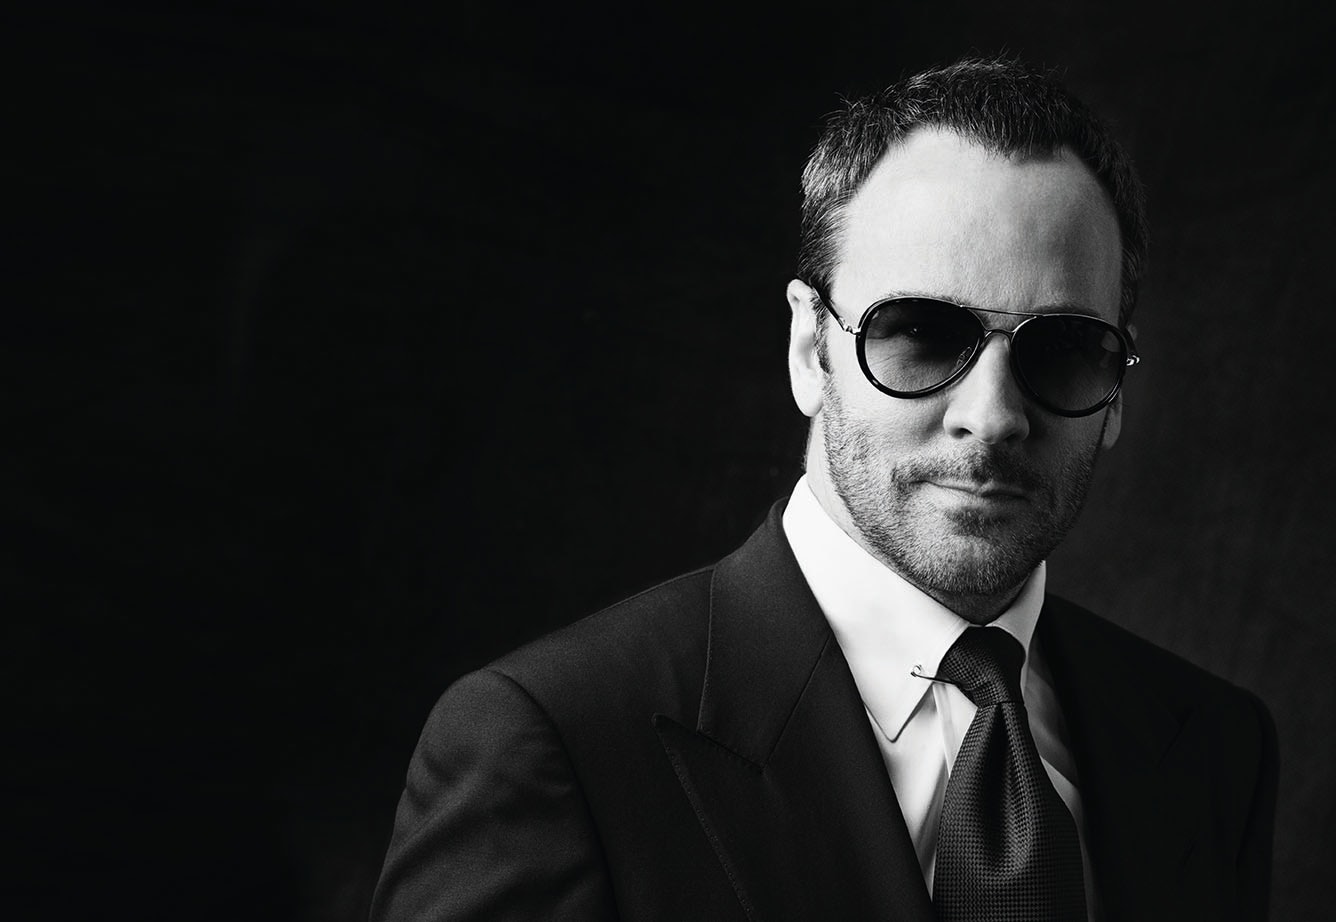 Tom Ford's Next Chapter: 'At This Point, My Work is More Sensual